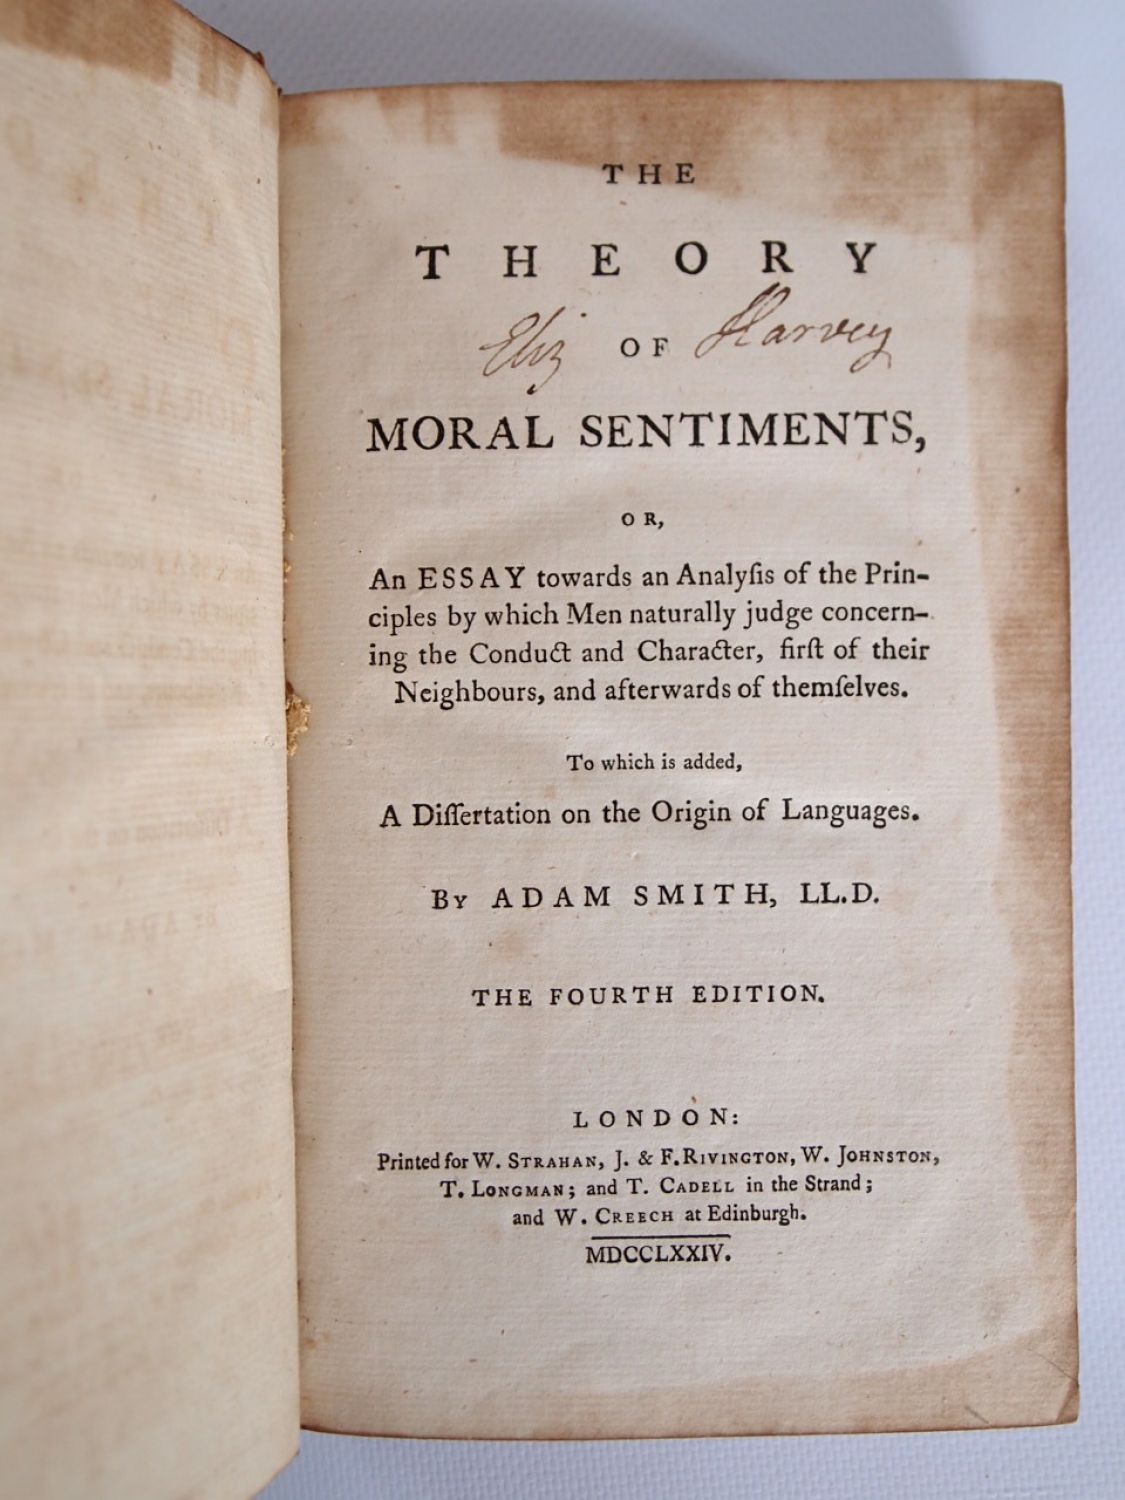 Read This: The Theory of Moral Sentiments By Adam Smith